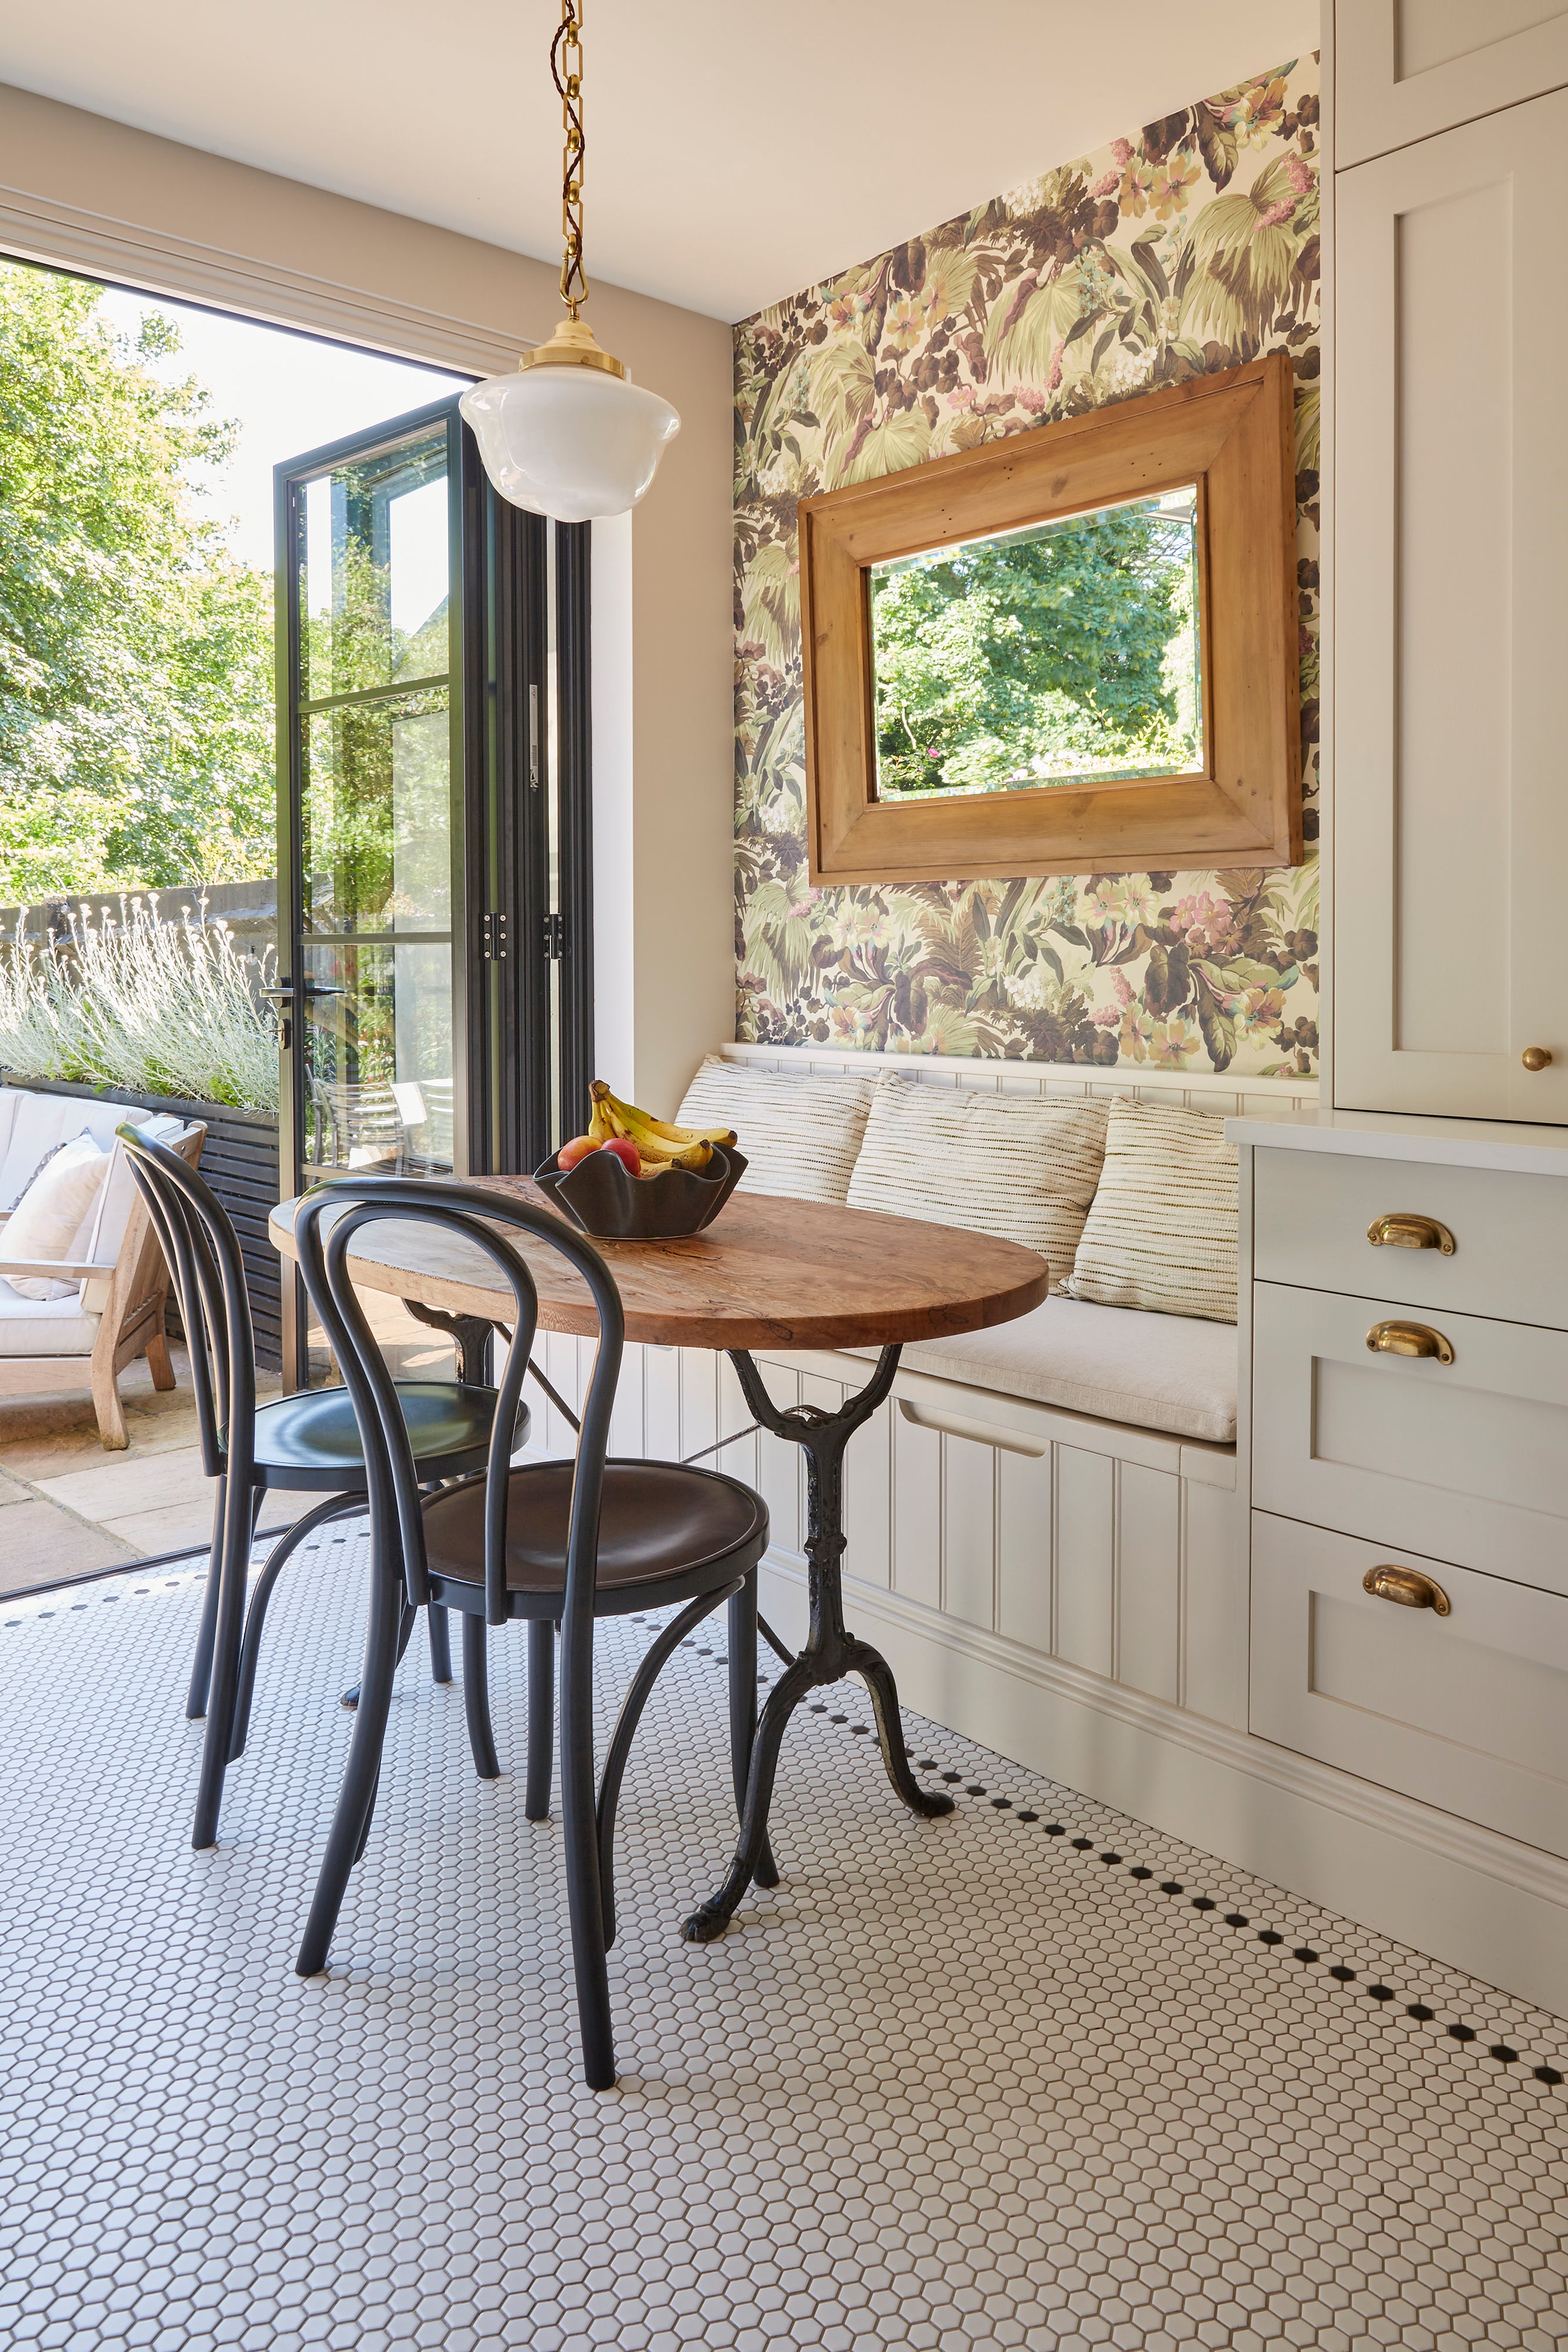 A light-filled breakfast nook is a great place to start any day